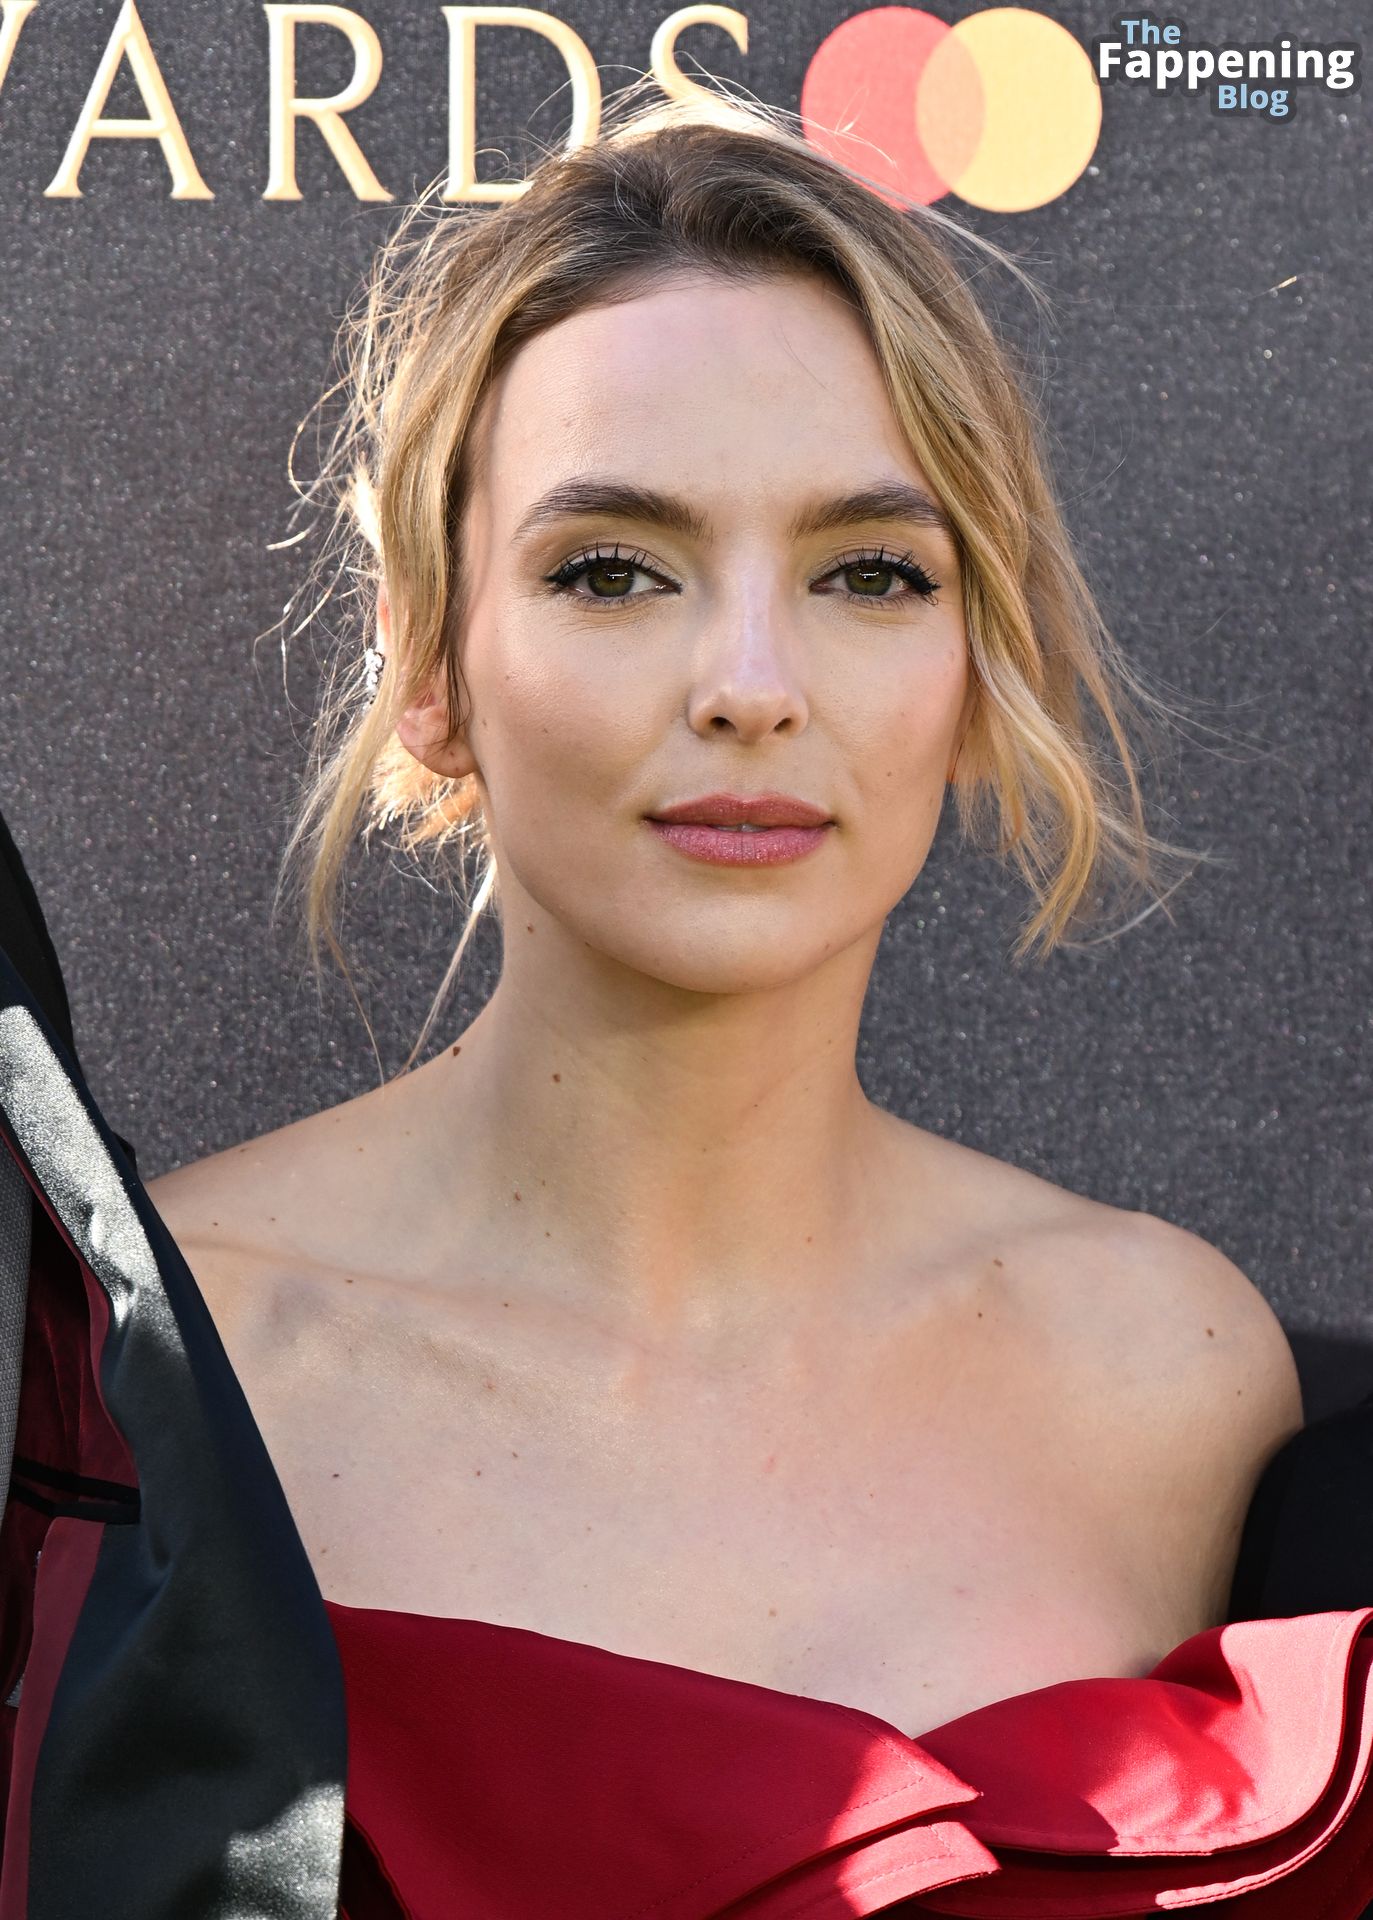 Jodie-Comer-Sexy-The-Fappening-Blog-24.jpg